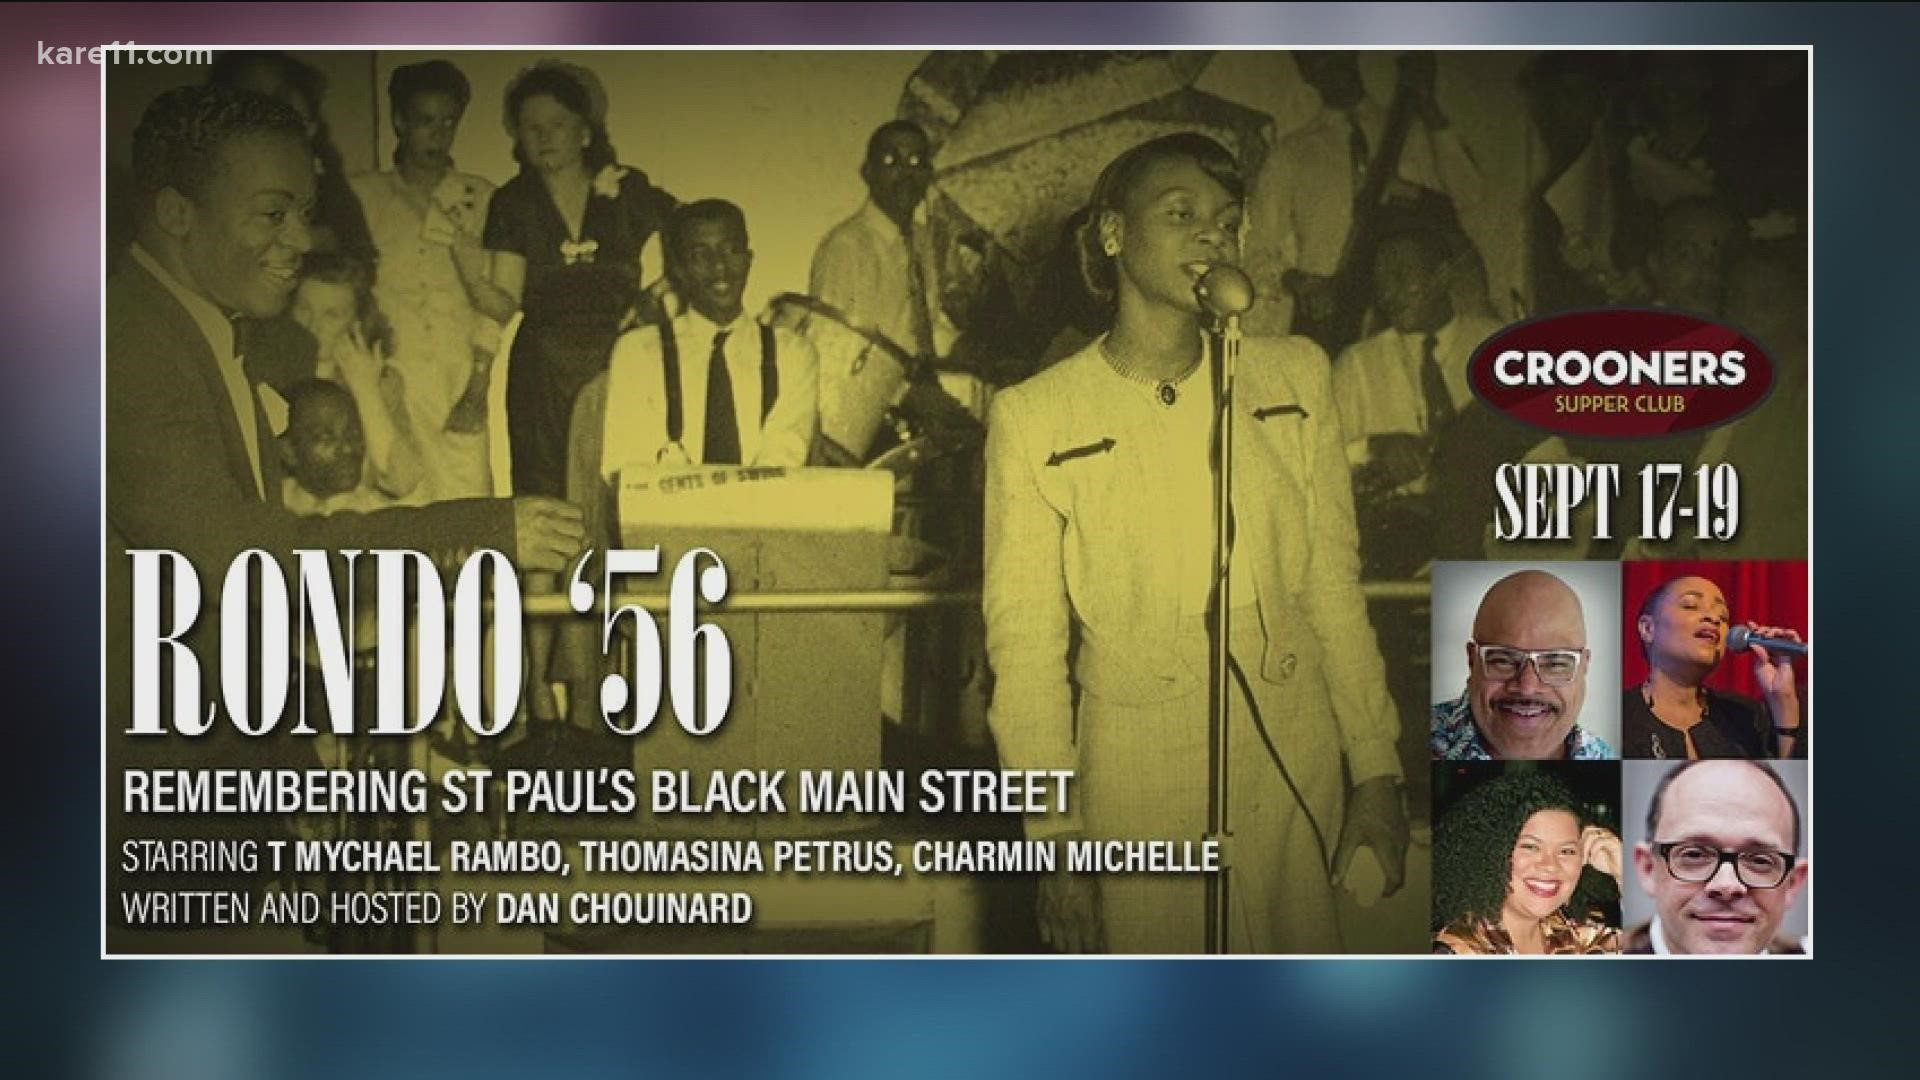 "Rondo '56: Remembering Saint Paul's Black Main Street" captures the essence of the neighborhood in the 1950's.